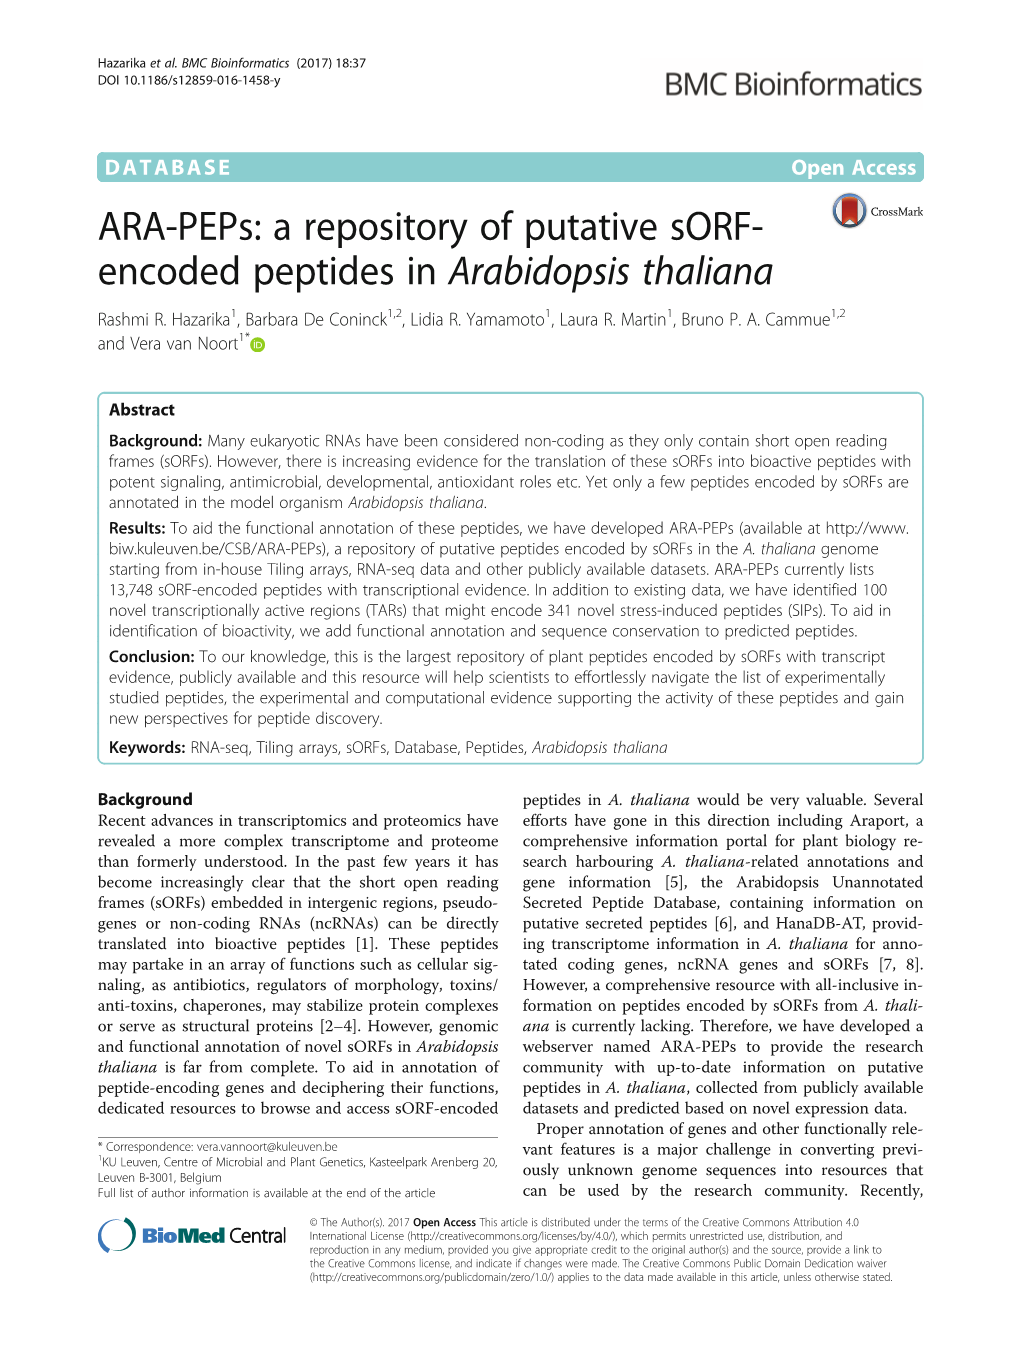 ARA-Peps: a Repository of Putative Sorf-Encoded Peptides In